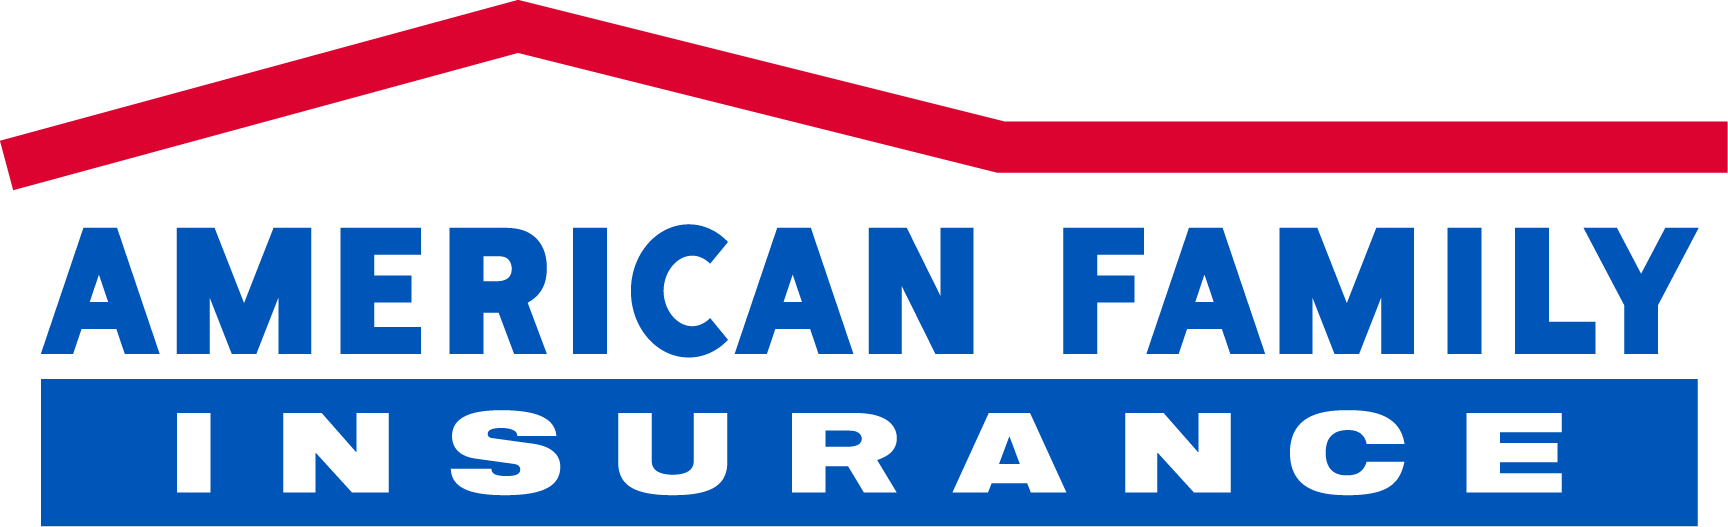 AmFam Logo - American Family Insurance Quotes for Auto, Home, Life and More